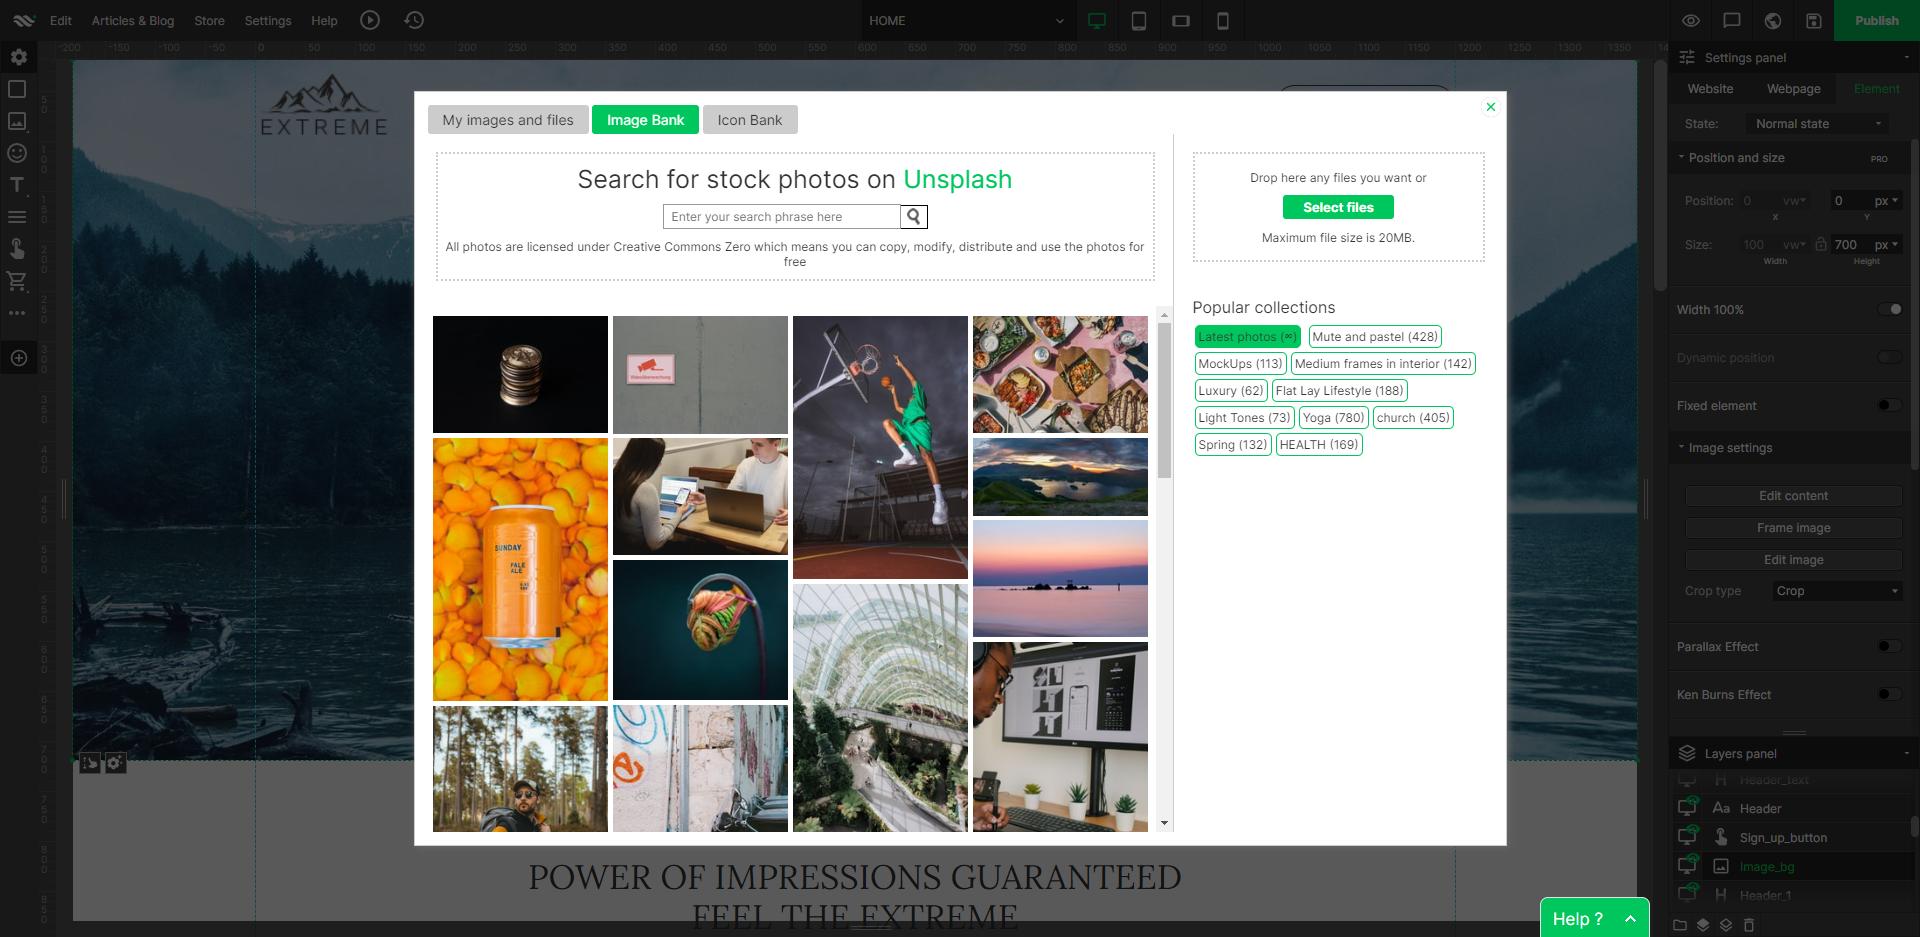 WebWave image search